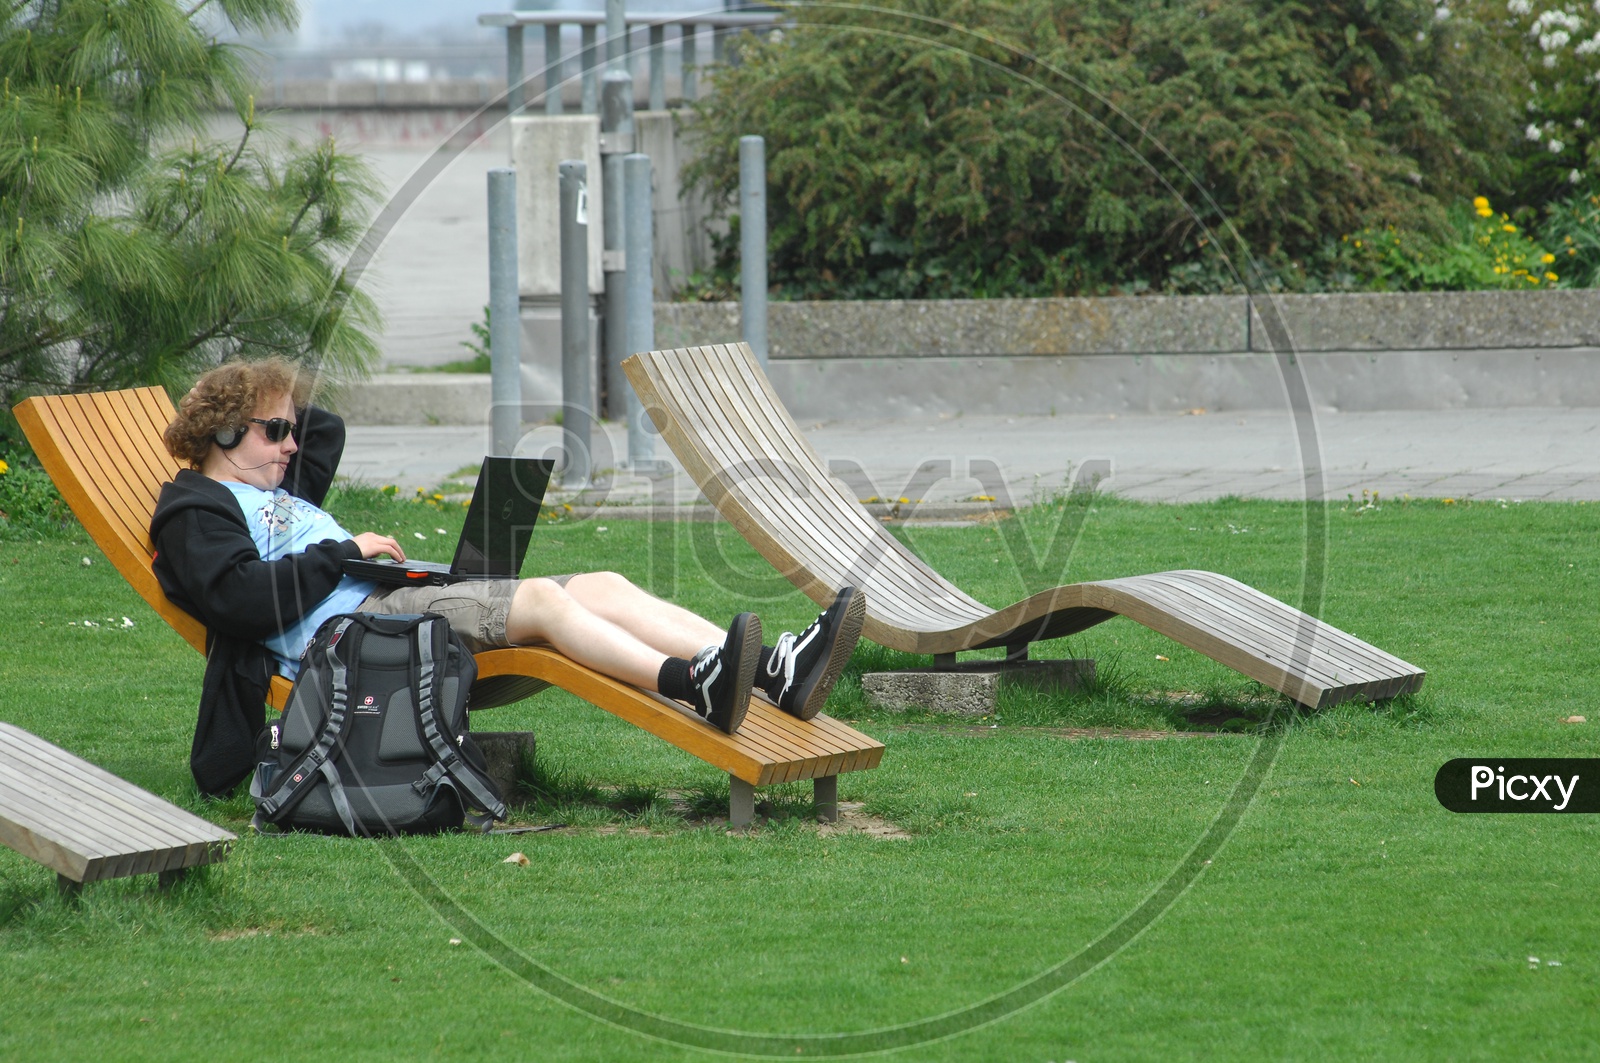 A Man Working In Laptop lying  on a Bench in a Lawn In Europe